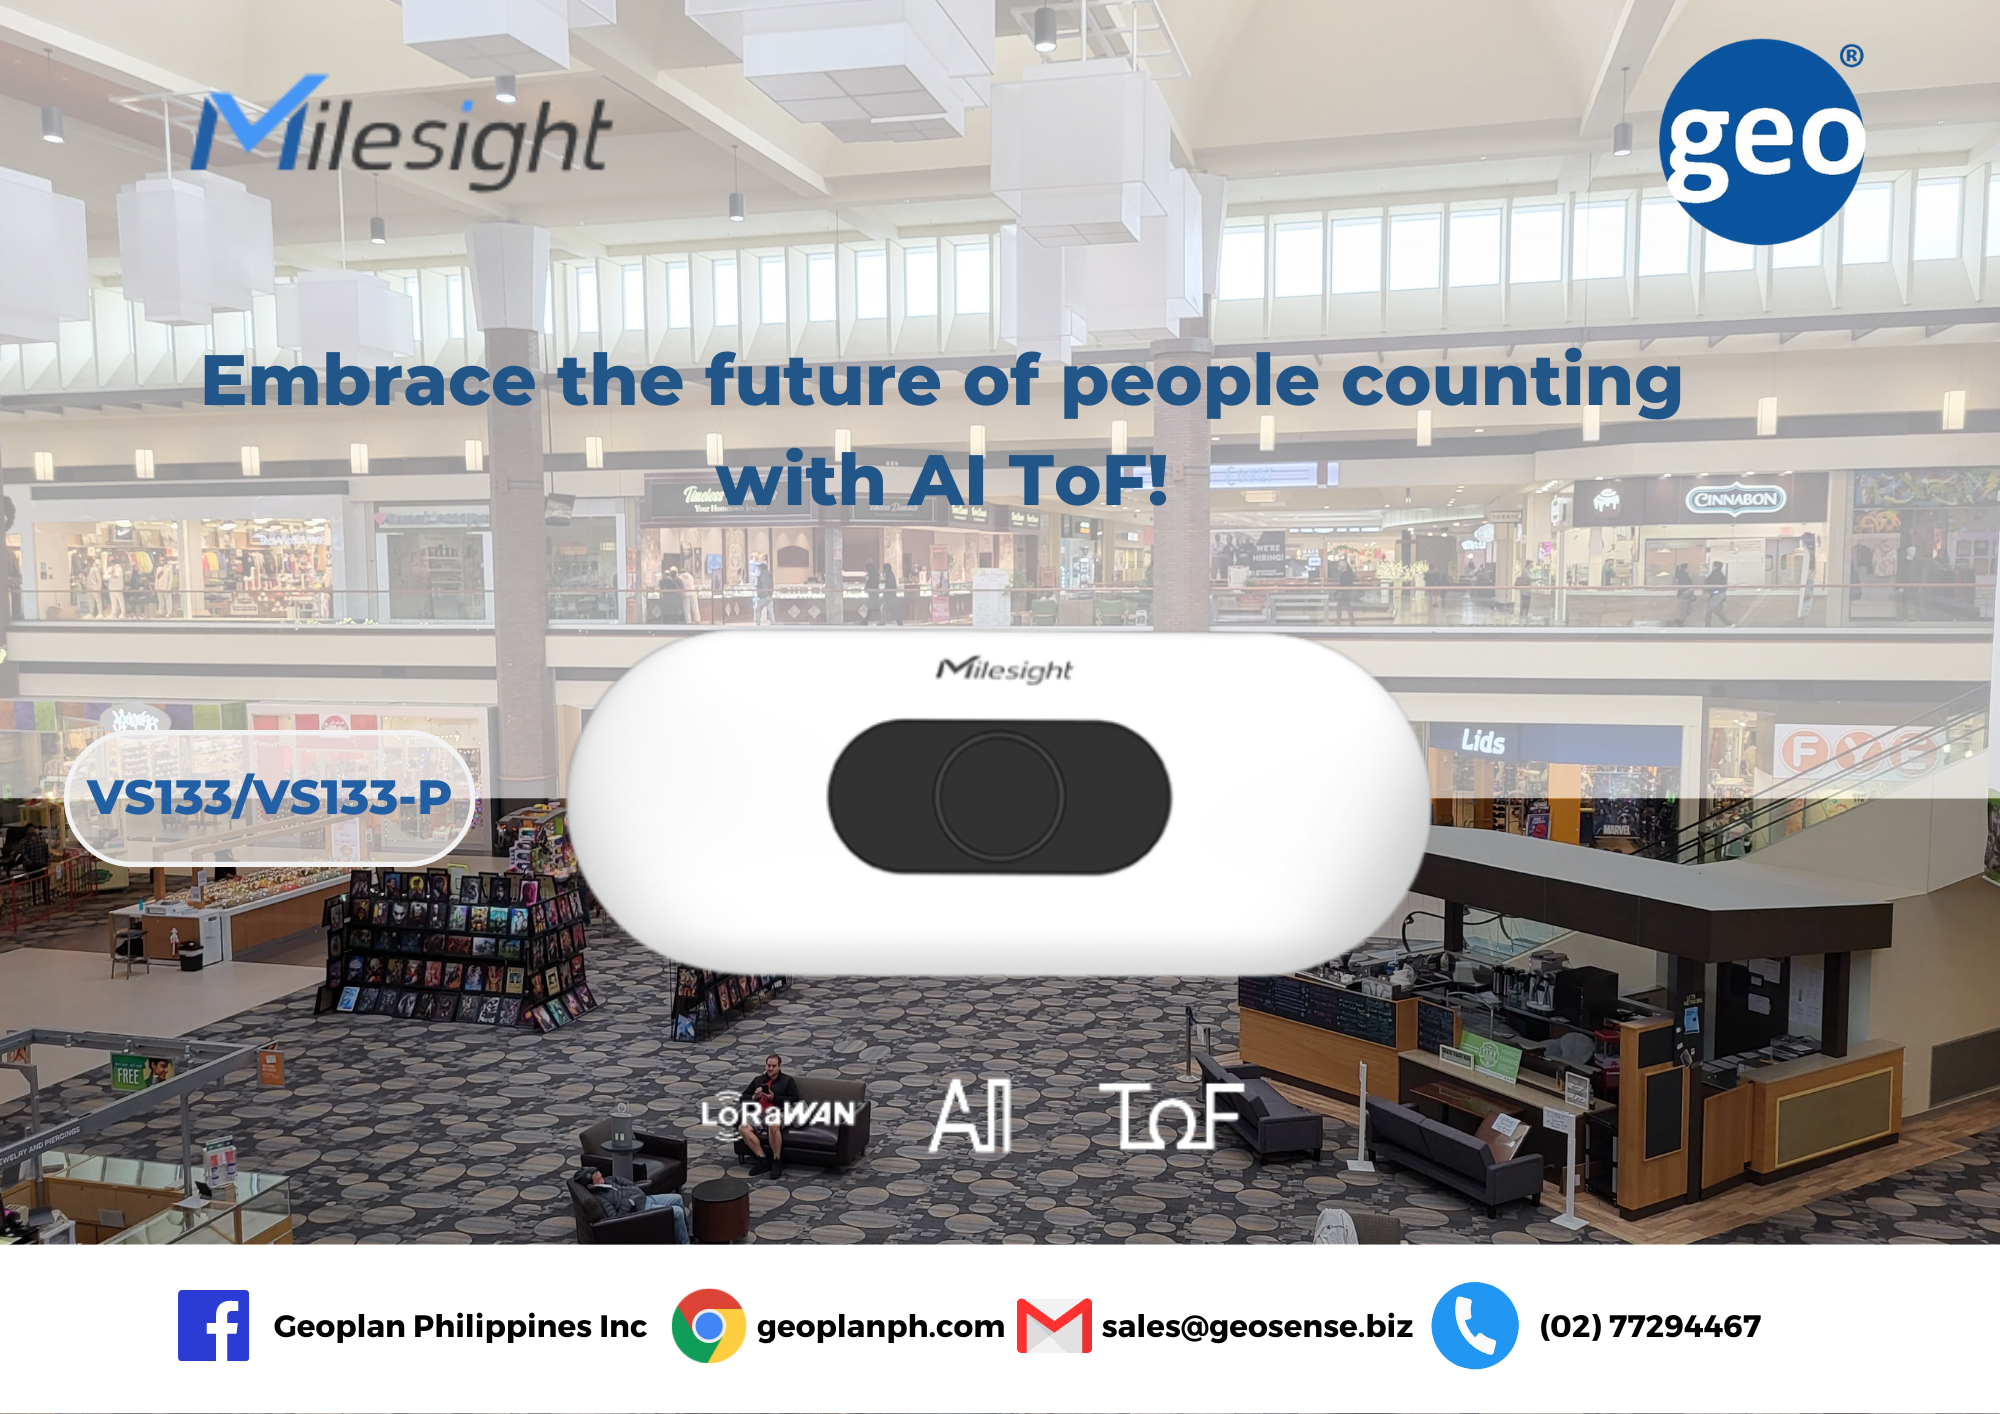 Milesight: VS133 Embrace the future of people counting with AI ToF technology!